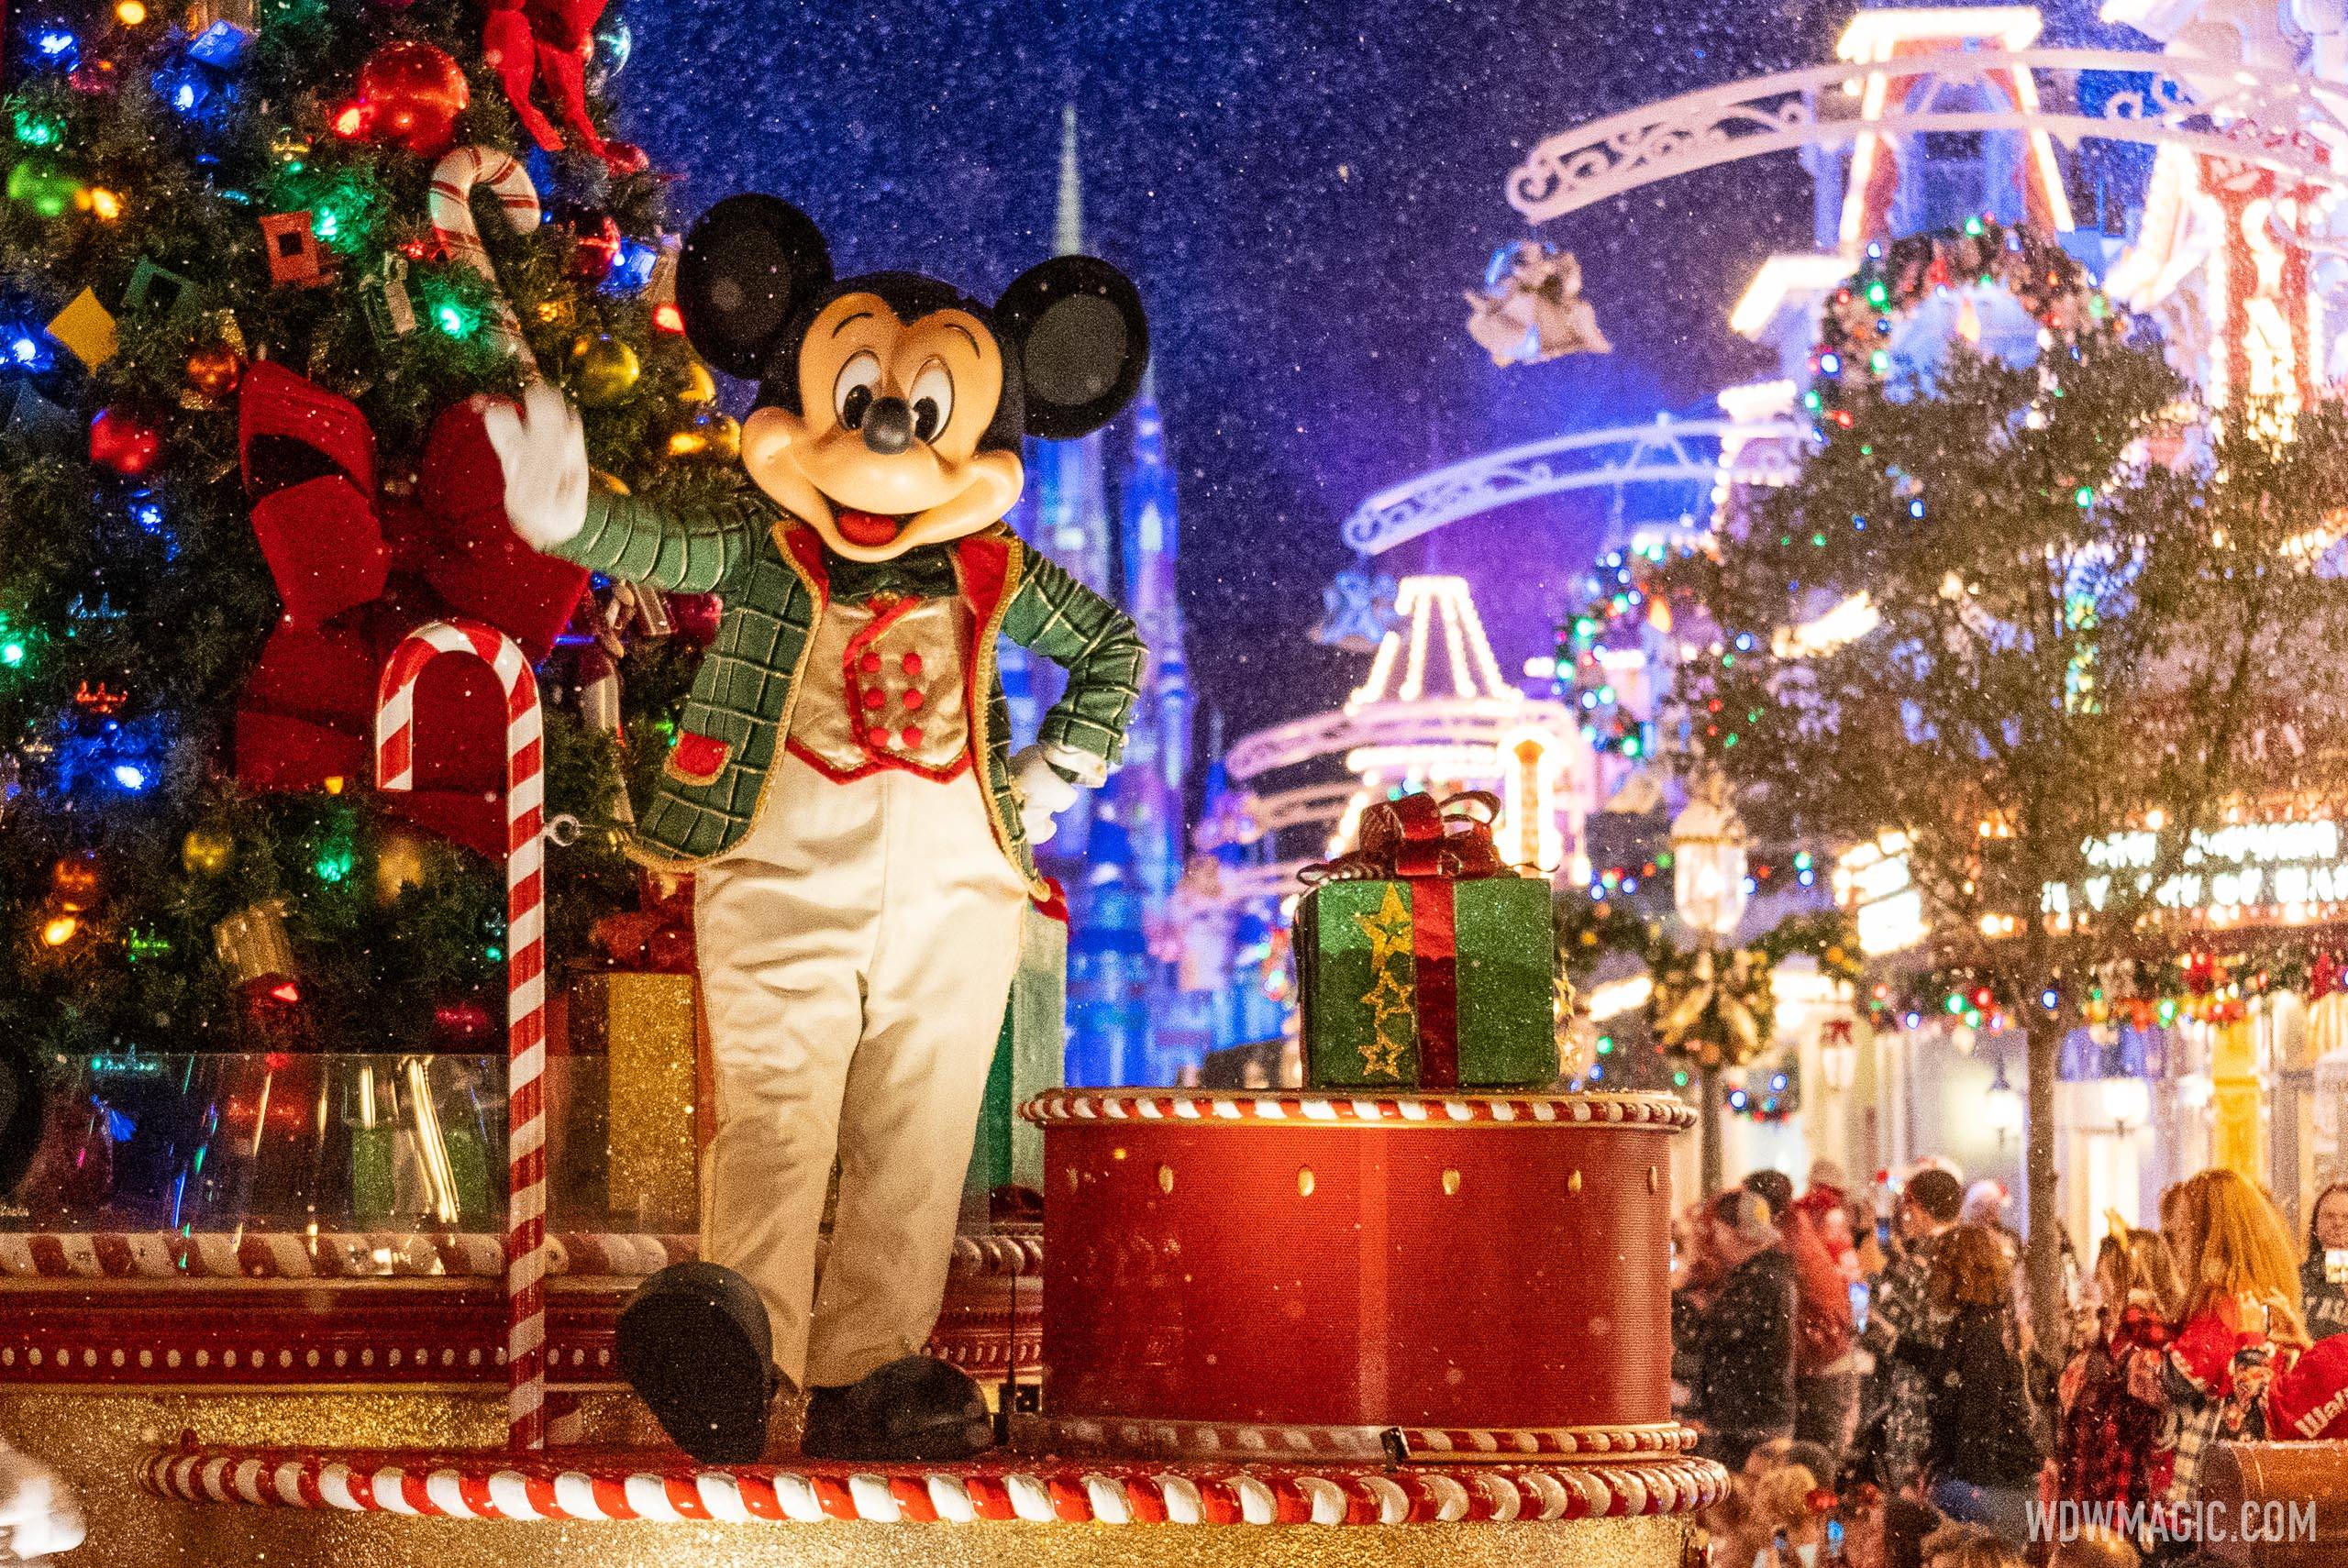 Disney Very Merriest After Hours overview